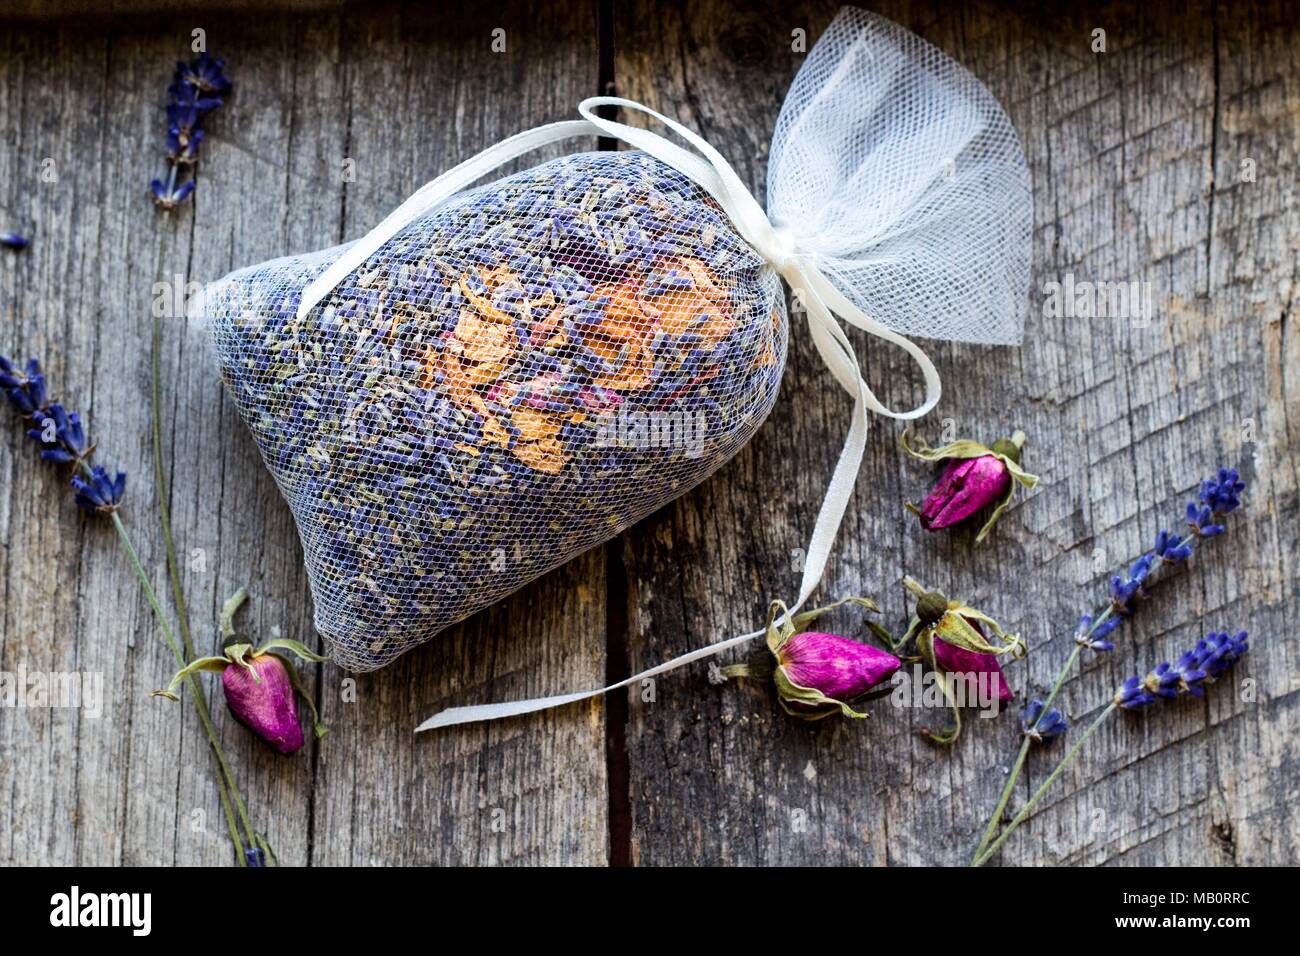 Amazon.com: Sonoma Lavender Dried Lavender Sachets by The Yard for Drawers  and Closets, Natural Air Freshener for Home, Car, Bag, Room, and Closet :  Home & Kitchen